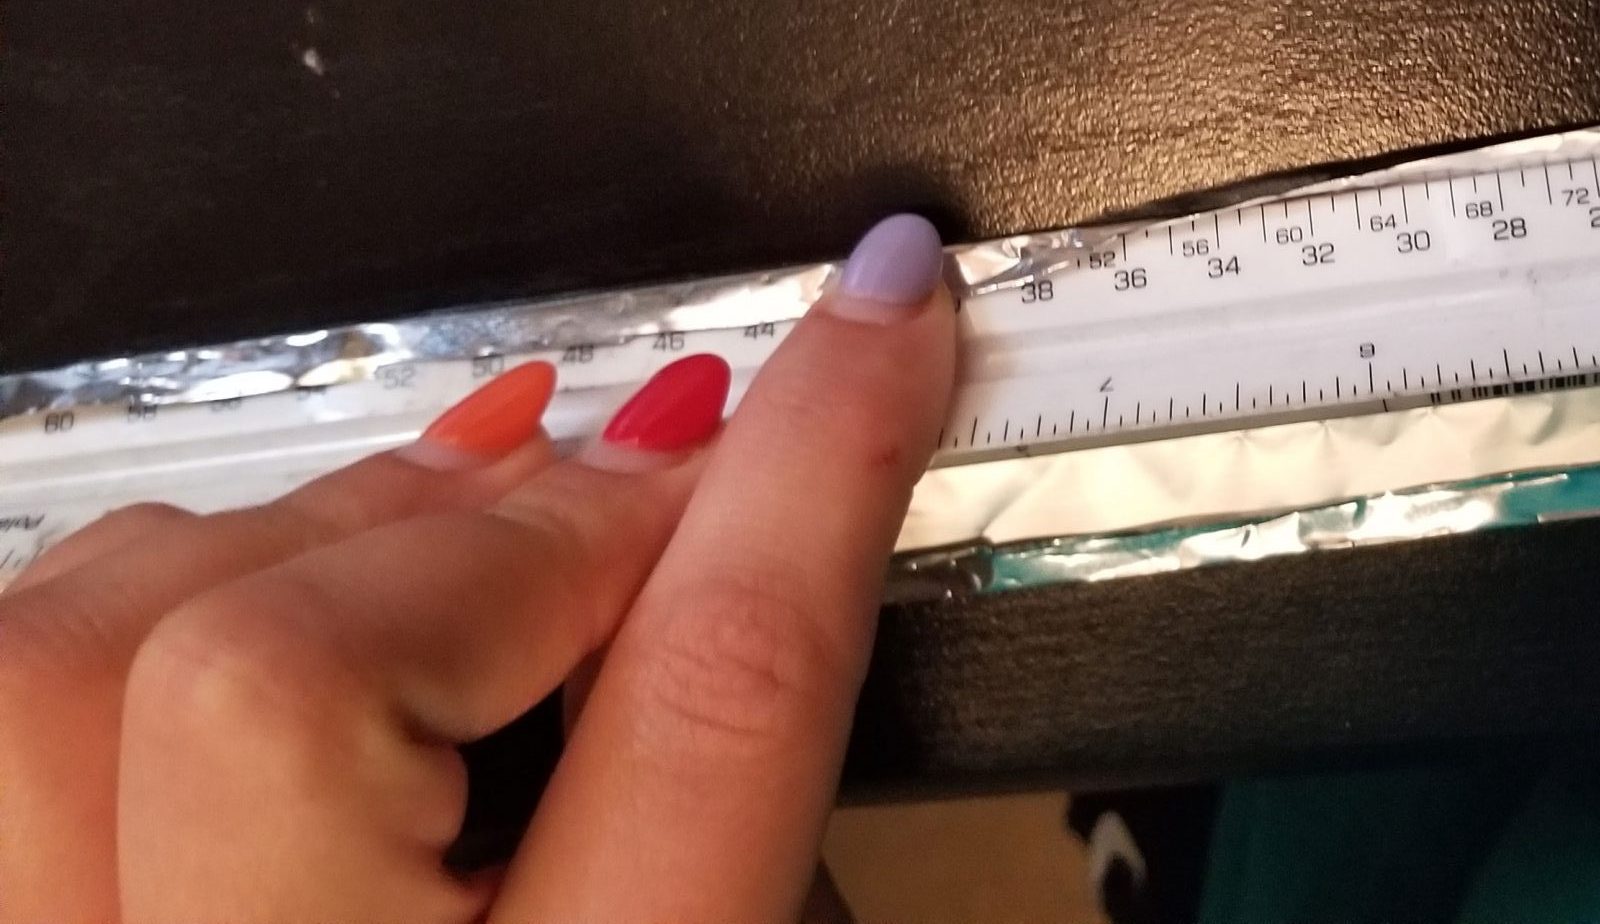 Aluminum foil wrapped around a ruler to give it a rectangular shape.